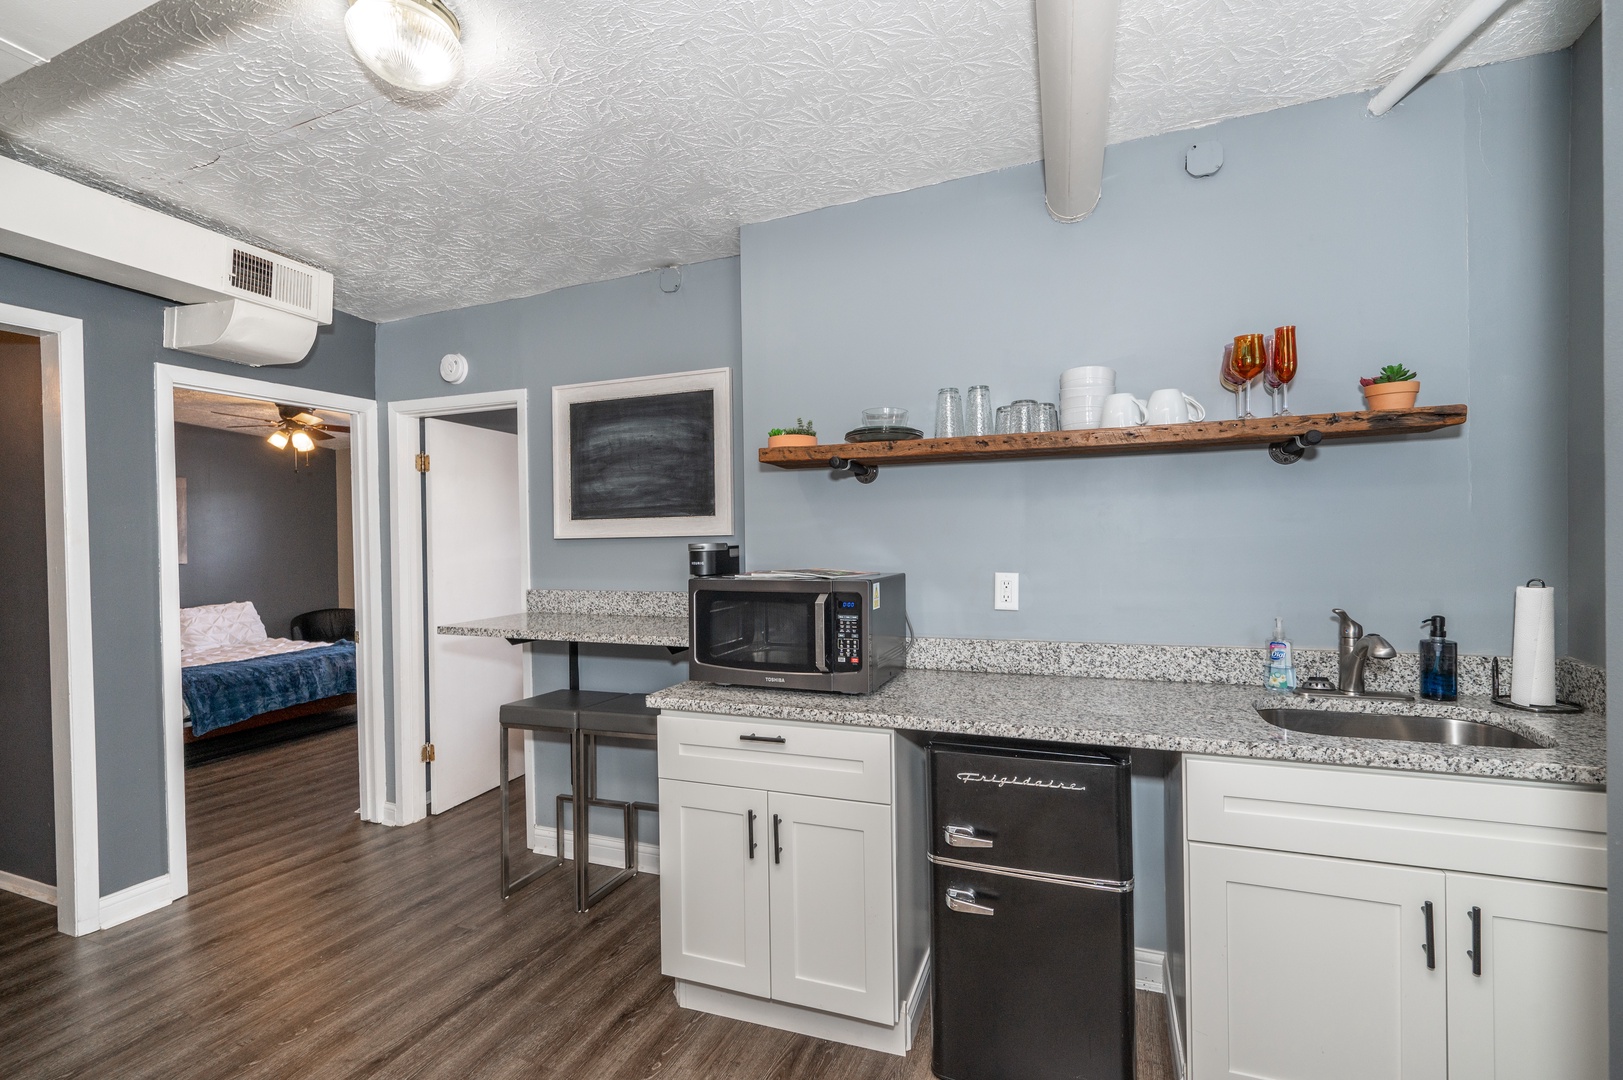 Entering Monmouth Loft 4, you will find a chic, well-equipped kitchenette